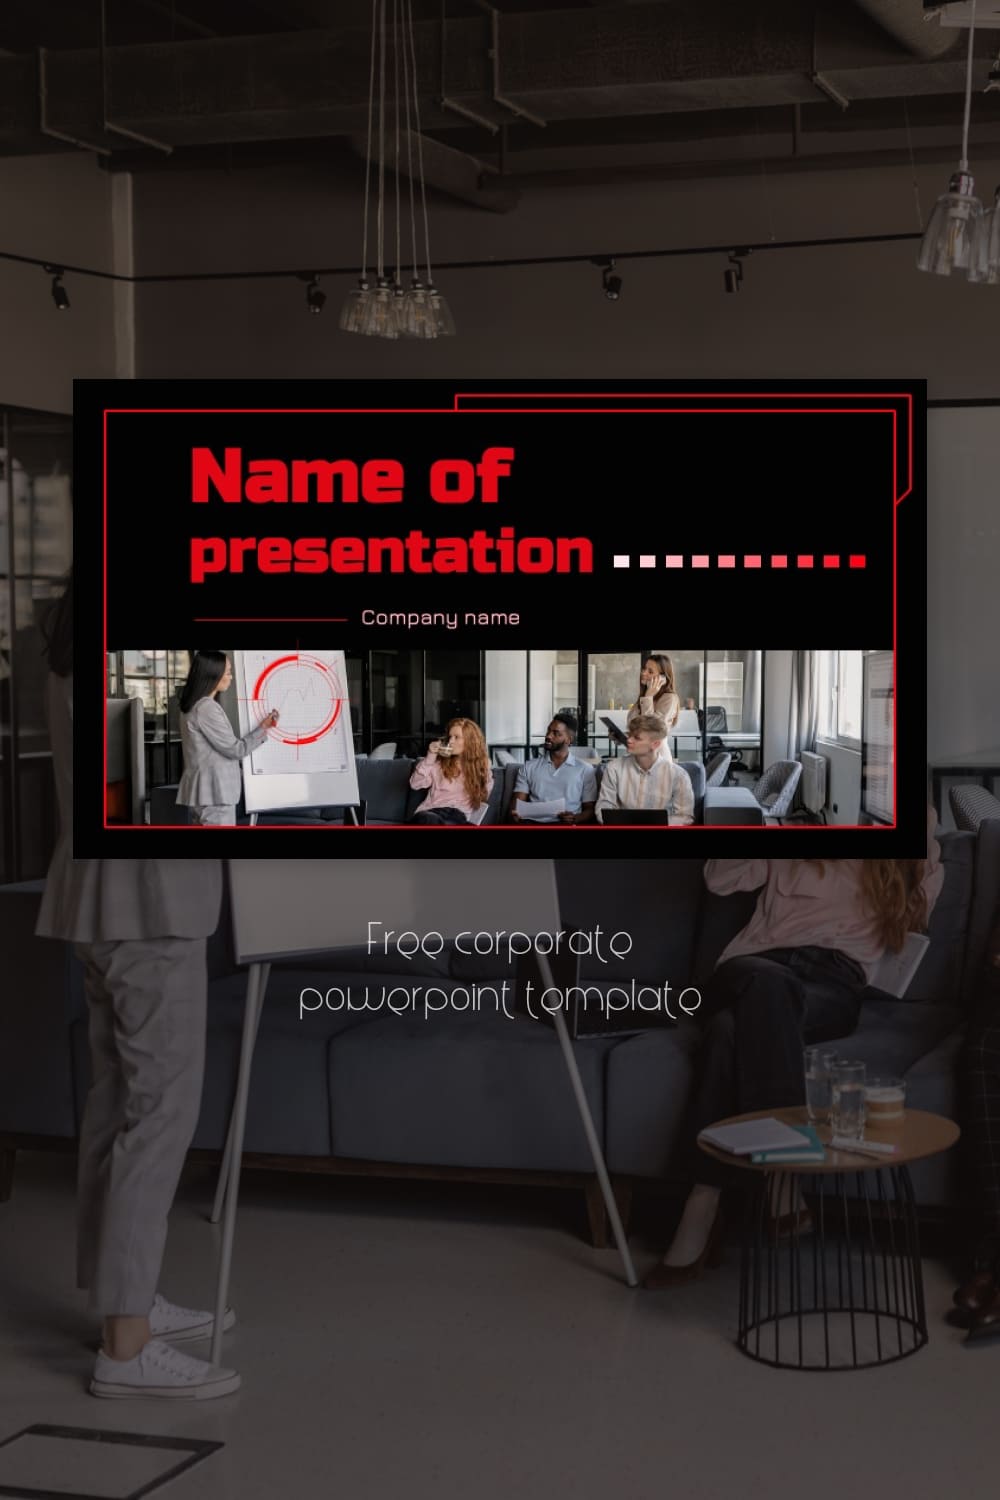 Free Corporate Powerpoint Template Pinterest.